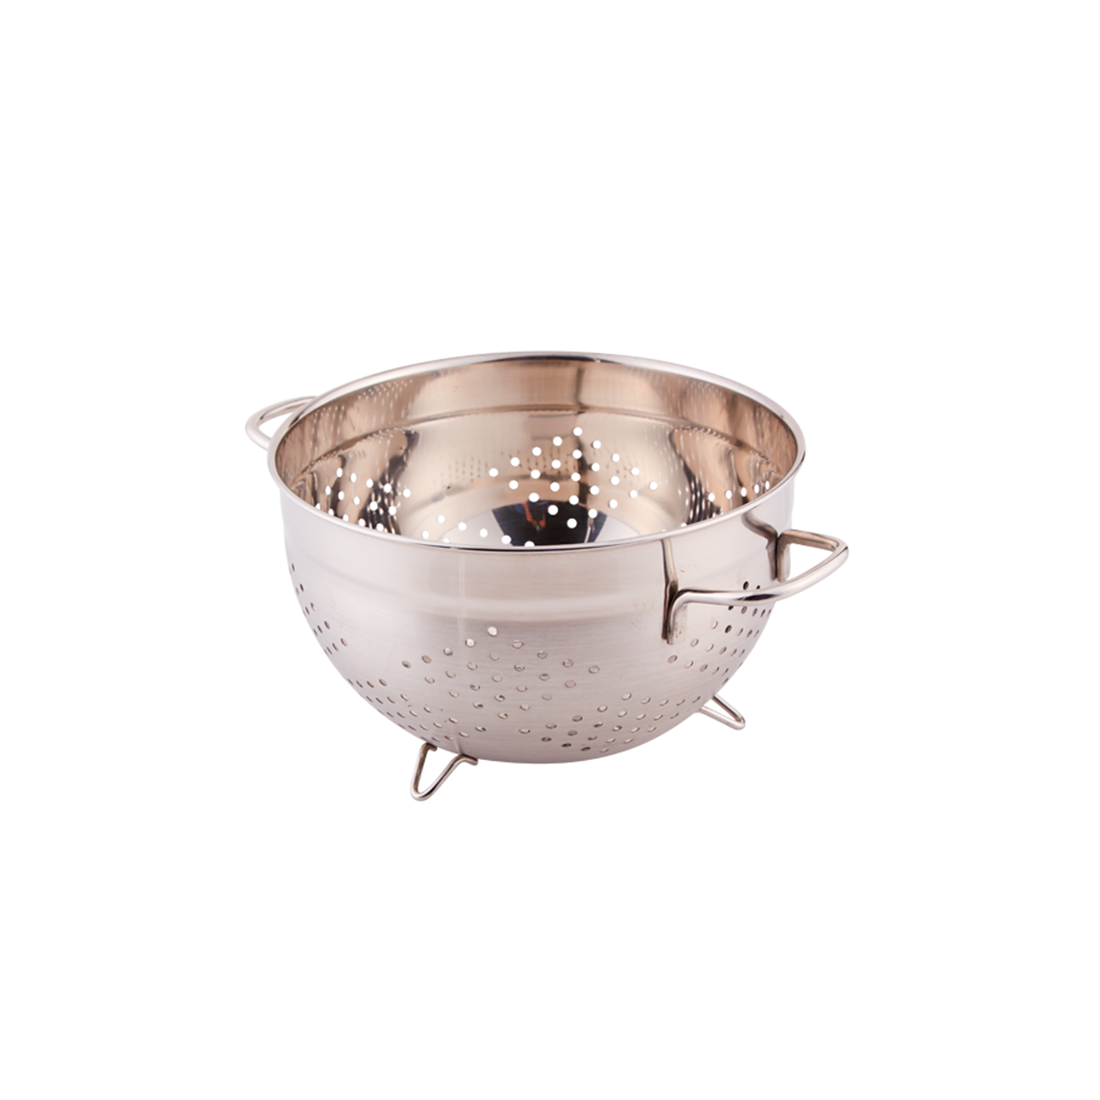 DAX Kitchen Colander, Stainless Steel Body, Chrome Finish, 10-1/2 x 10-1/2 x 7 Inches, Compatible for Sinks DAX-SQ-3018